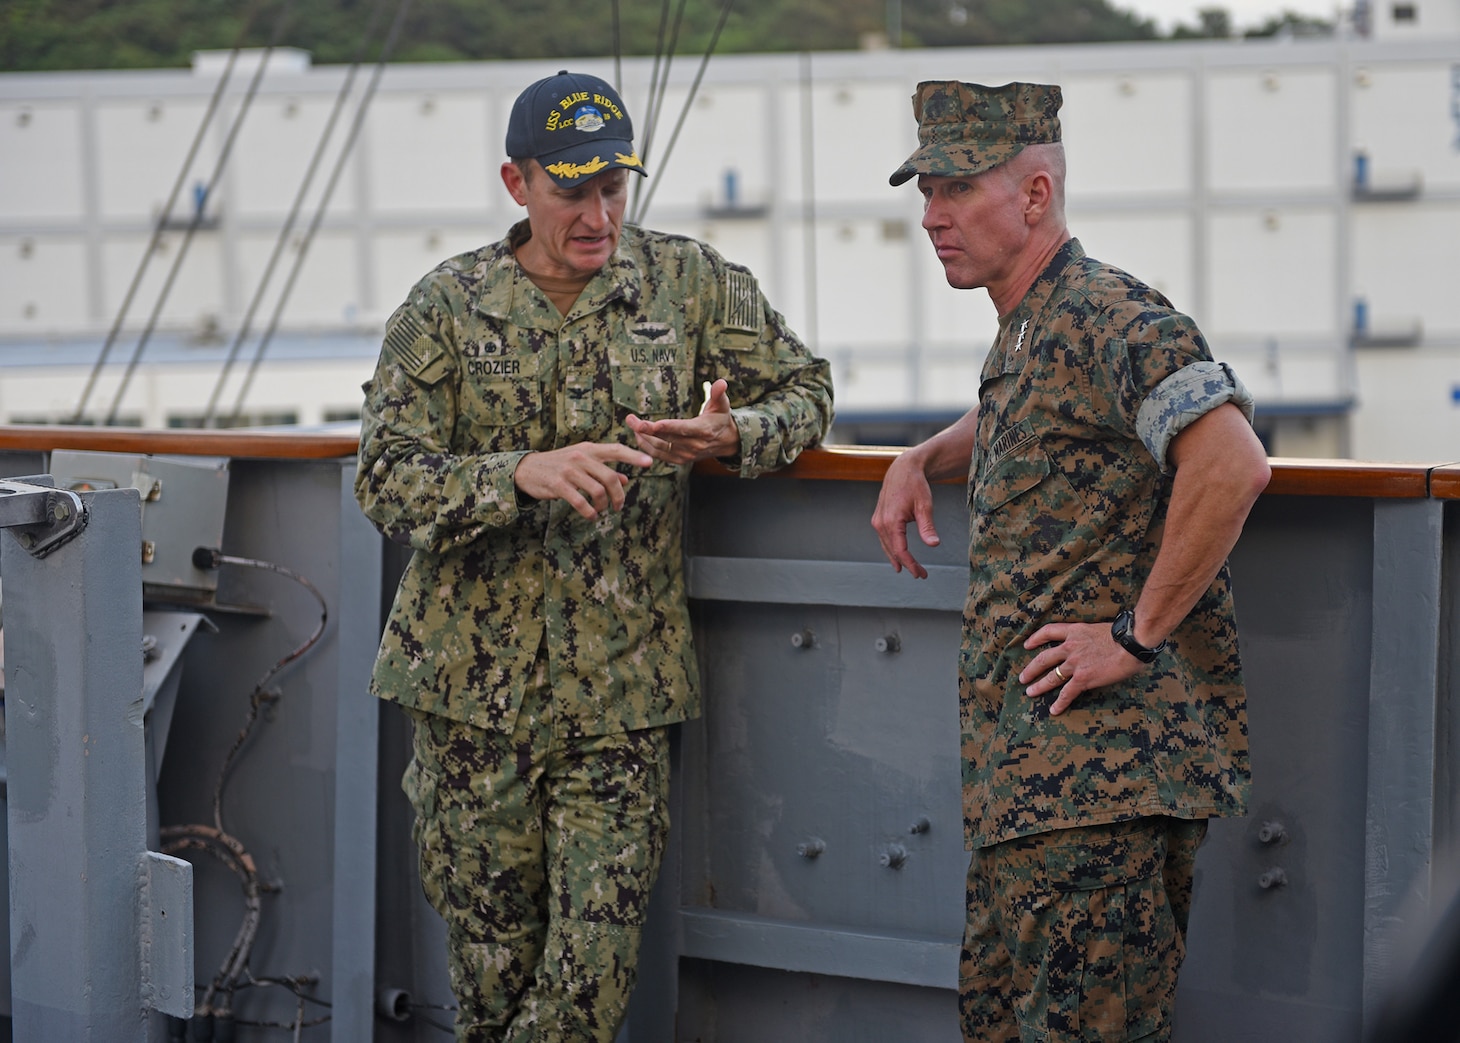 YOKOSUKA, Japan (Sept. 18, 2018) Lt. Gen. Eric M. Smith, Commanding General, III Marine Expeditionary Force, tours 7th Fleet Flagship USS Blue Ridge (LCC 19) while the ship is moored at Fleet Activities Yokosuka, Sep. 18. Lt. Gen. Eric M. Smith, who took command in August, met with USS Blue Ridge commanding officer, Capt. Brett E. Crozier, to gain a better understanding of fleet operations and build relationships with senior leadership.